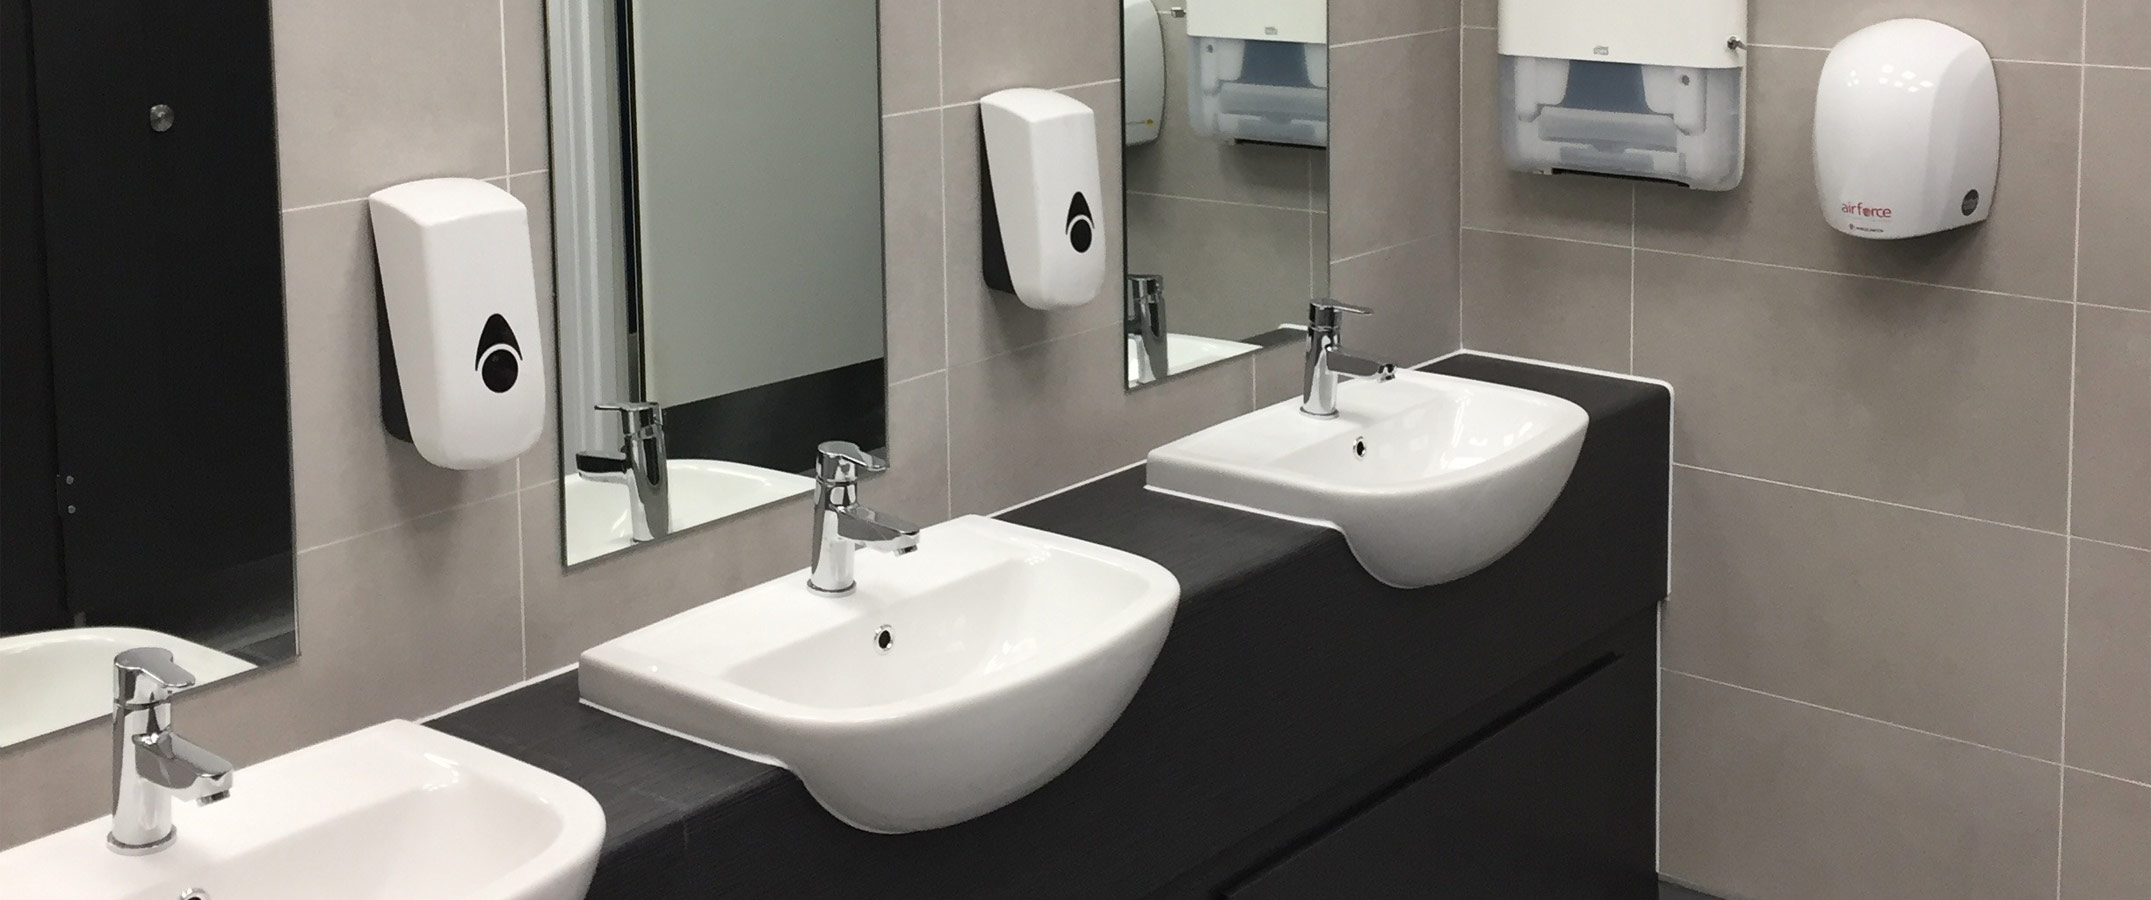 Associated British Ports - Toilet Fit Out